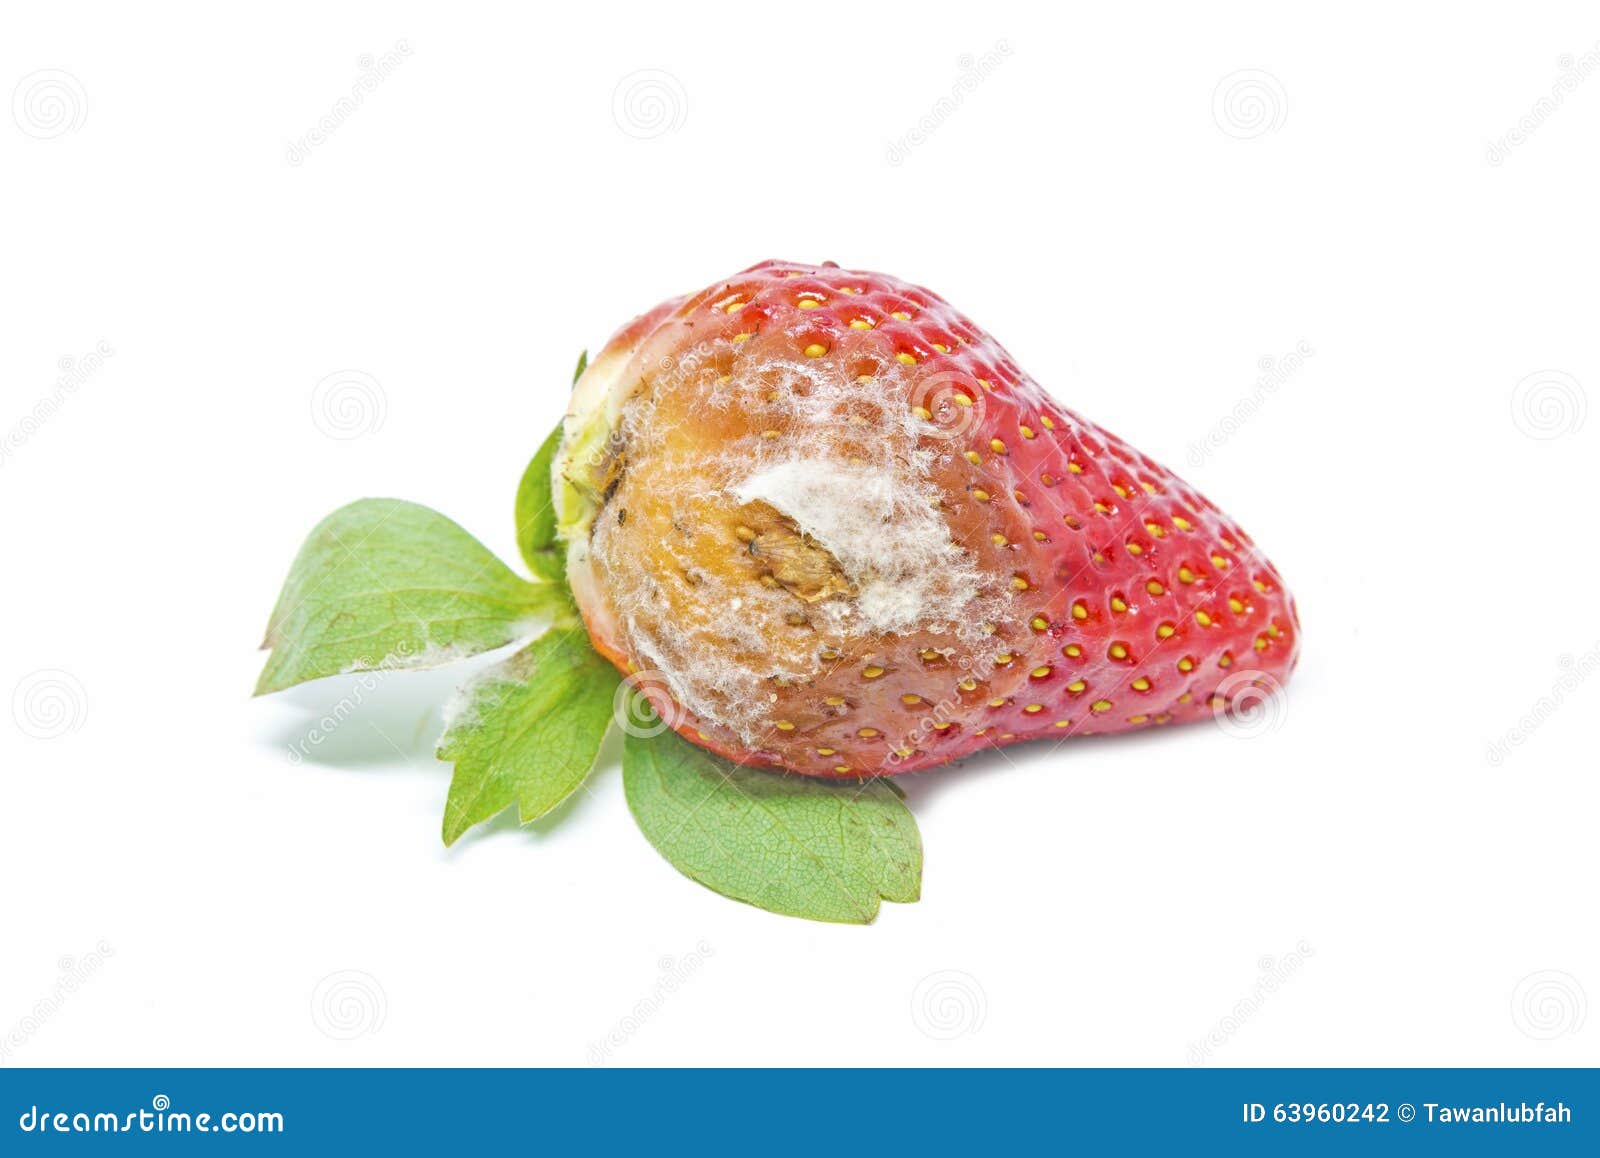 strawberry with mold fungus, no longer suitable for consumption